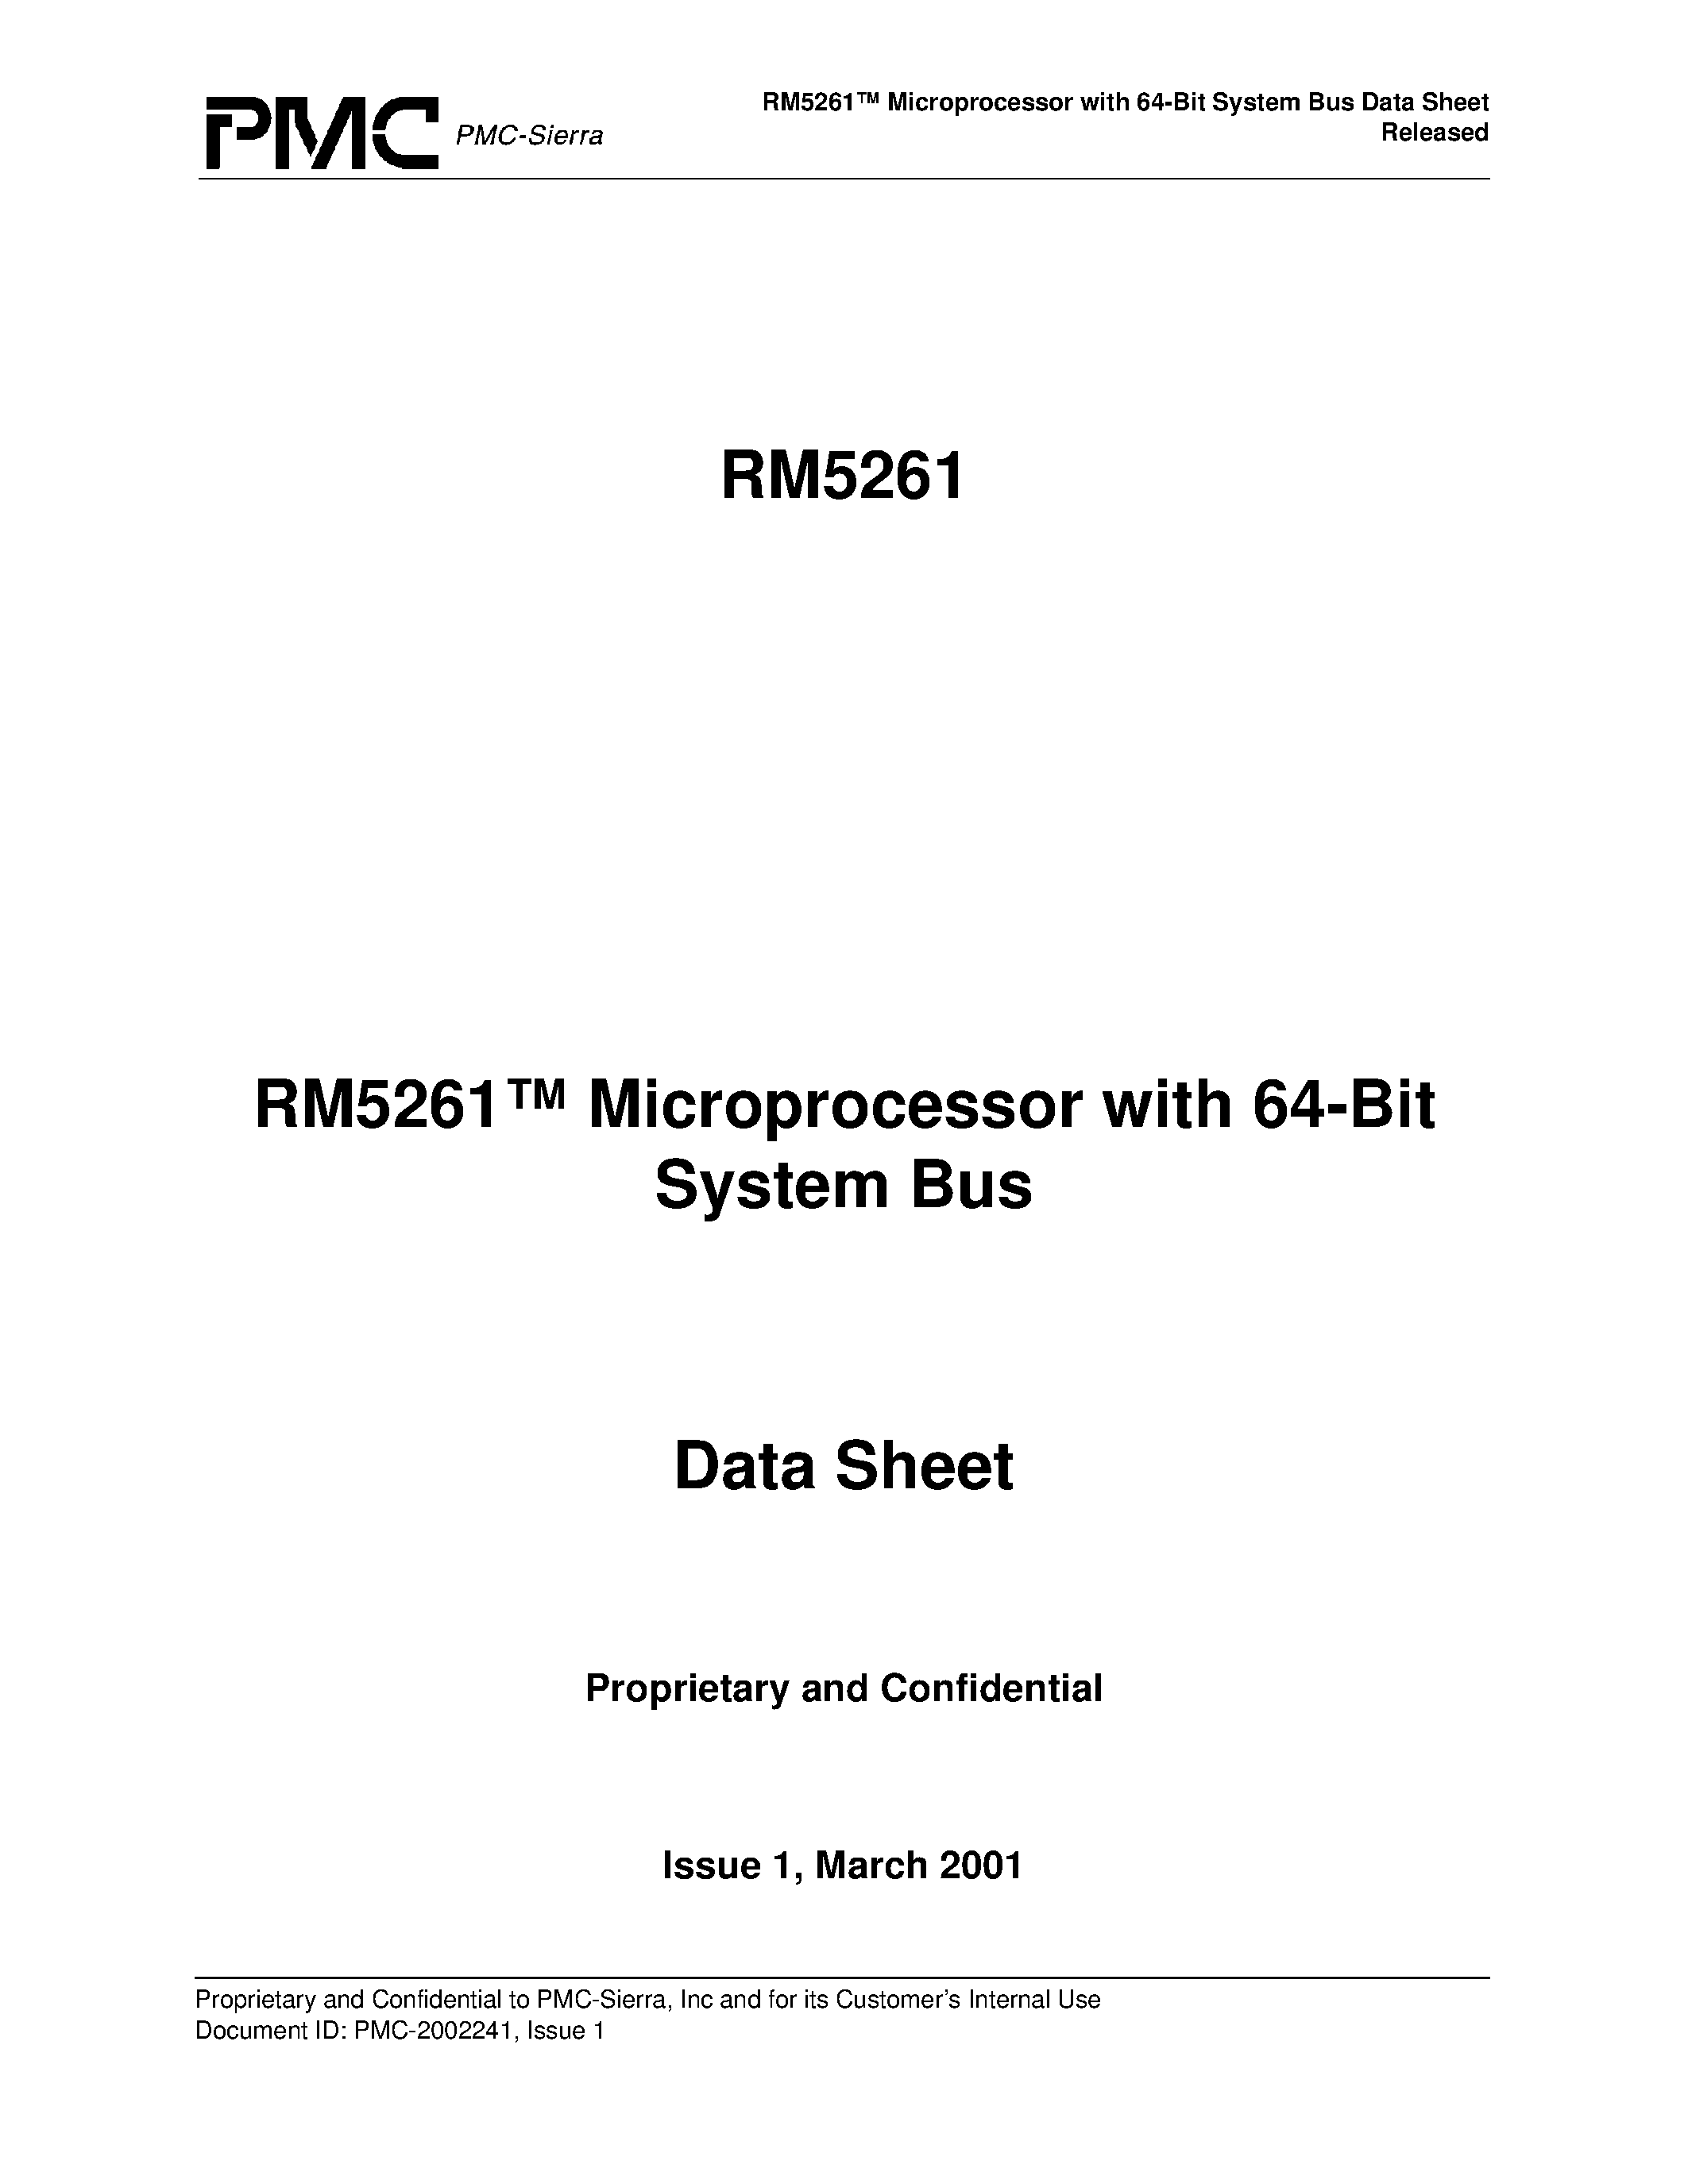 Даташит RM5261-250-Q - RM5261 Microprocessor with 64-Bit System Bus Data Sheet Released страница 1